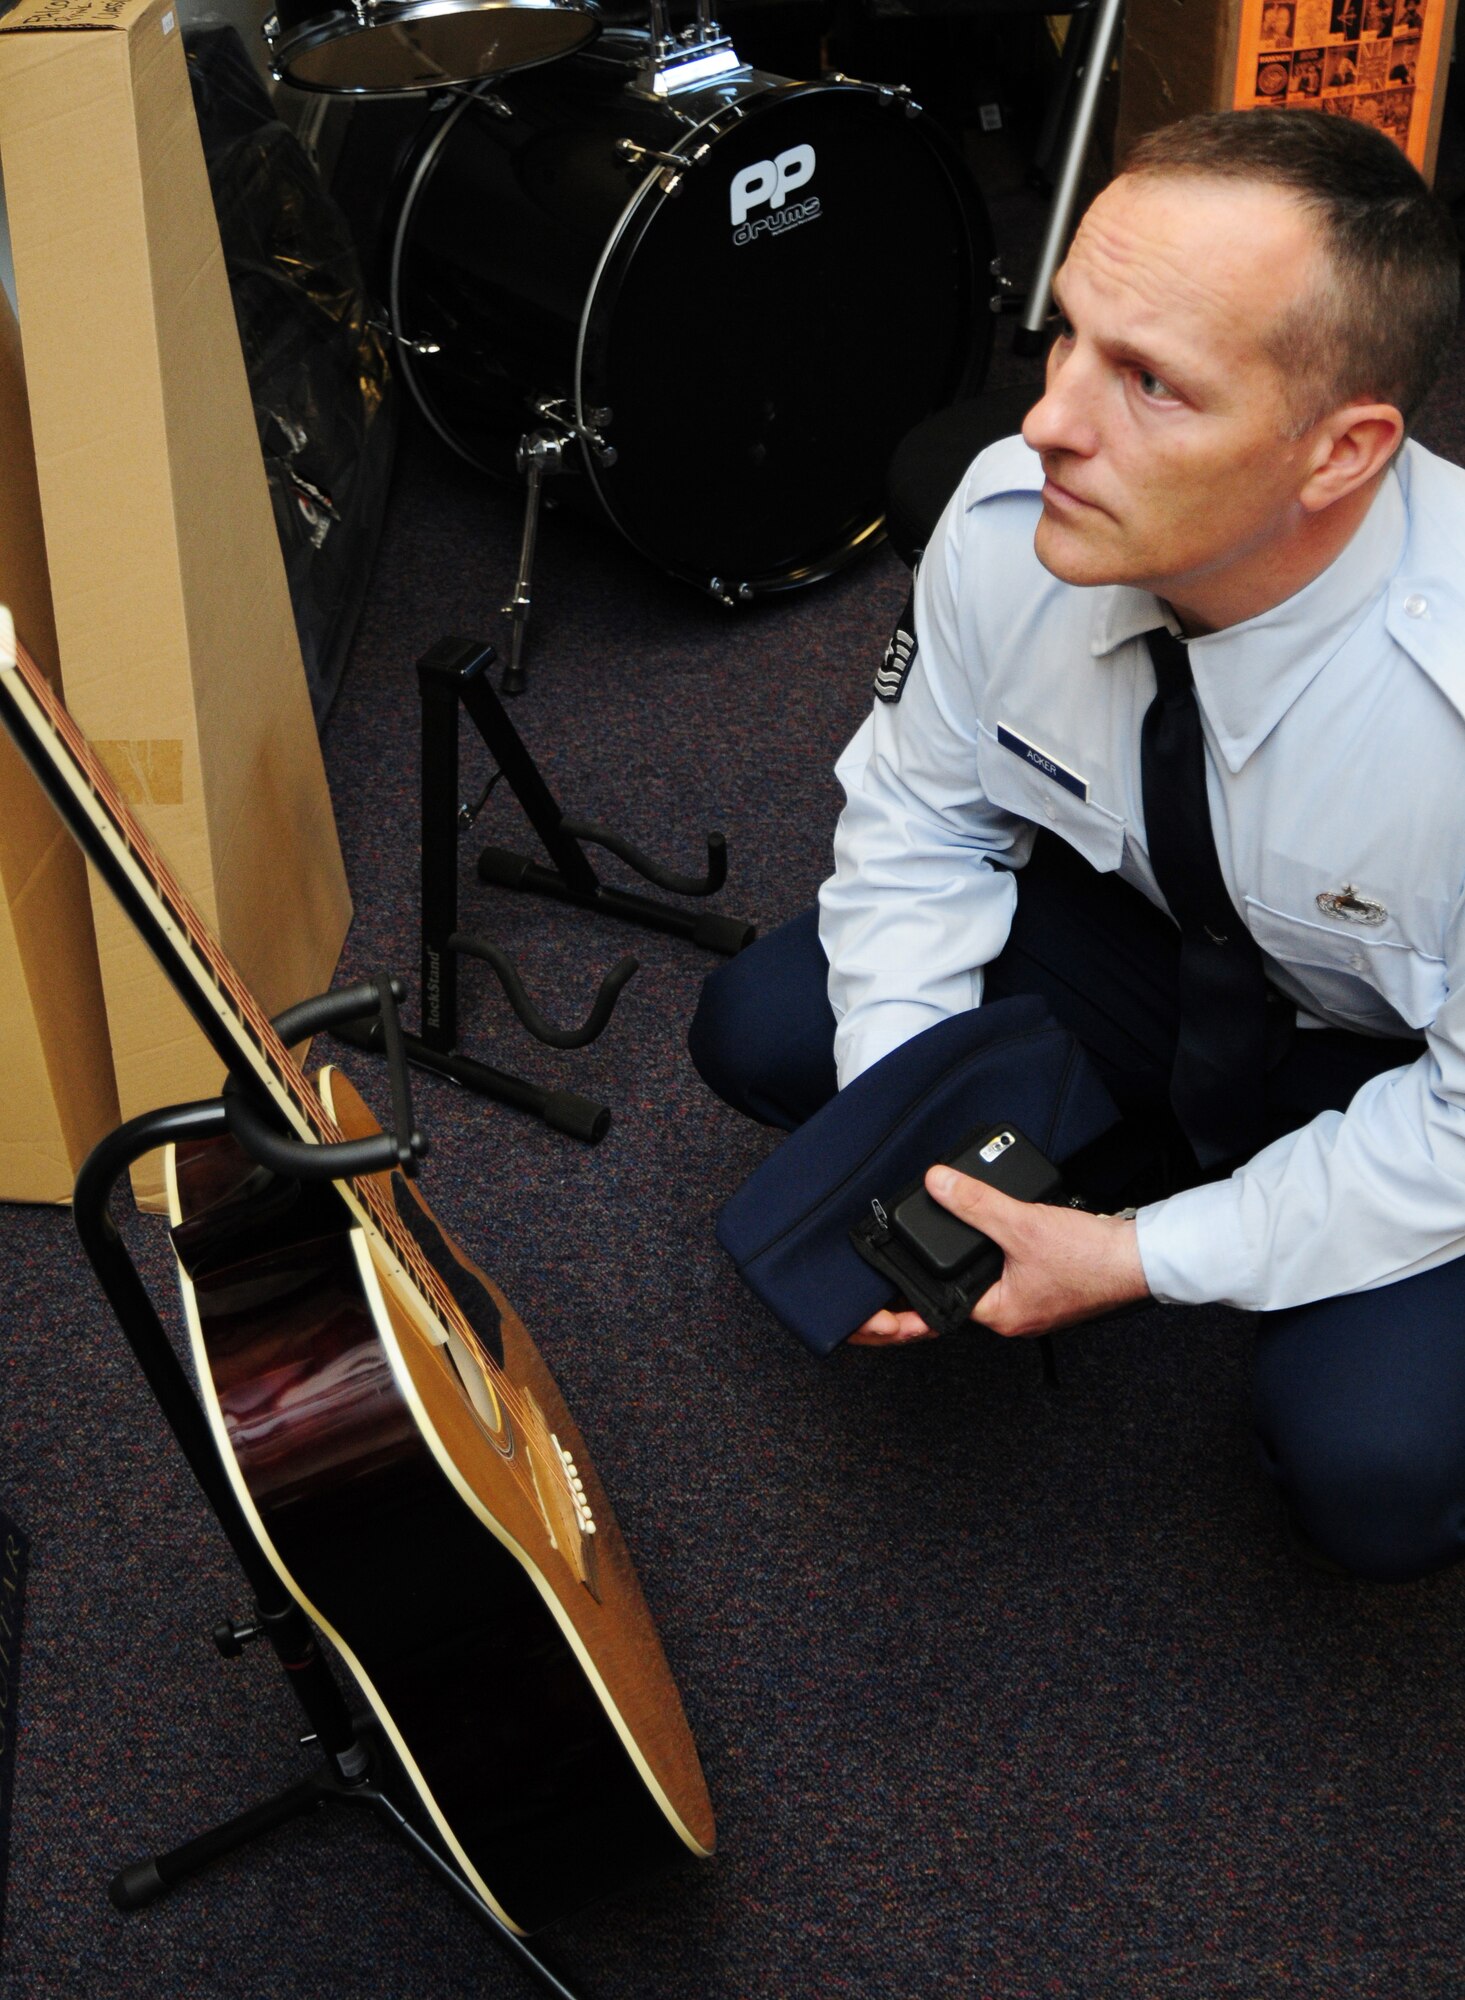 Master Sgt. Stephen Acker, 48th Operations Group Intelligence NCO in-charge of intelligence analysis, looks at a guitar at the Outdoor Recreation music store on RAF Lakenheath June 21. The selection of instruments includes guitars (electric, classic and acoustic) saxophones, flutes, violins, organs, drum kits and more.  Accessories include strings, leads, drumsticks, music stands guitar straps drum skins, picks etc., with a large selection of amplifiers on hand. (U.S. Air Force photo/Airman 1st Class Lausanne Morgan)